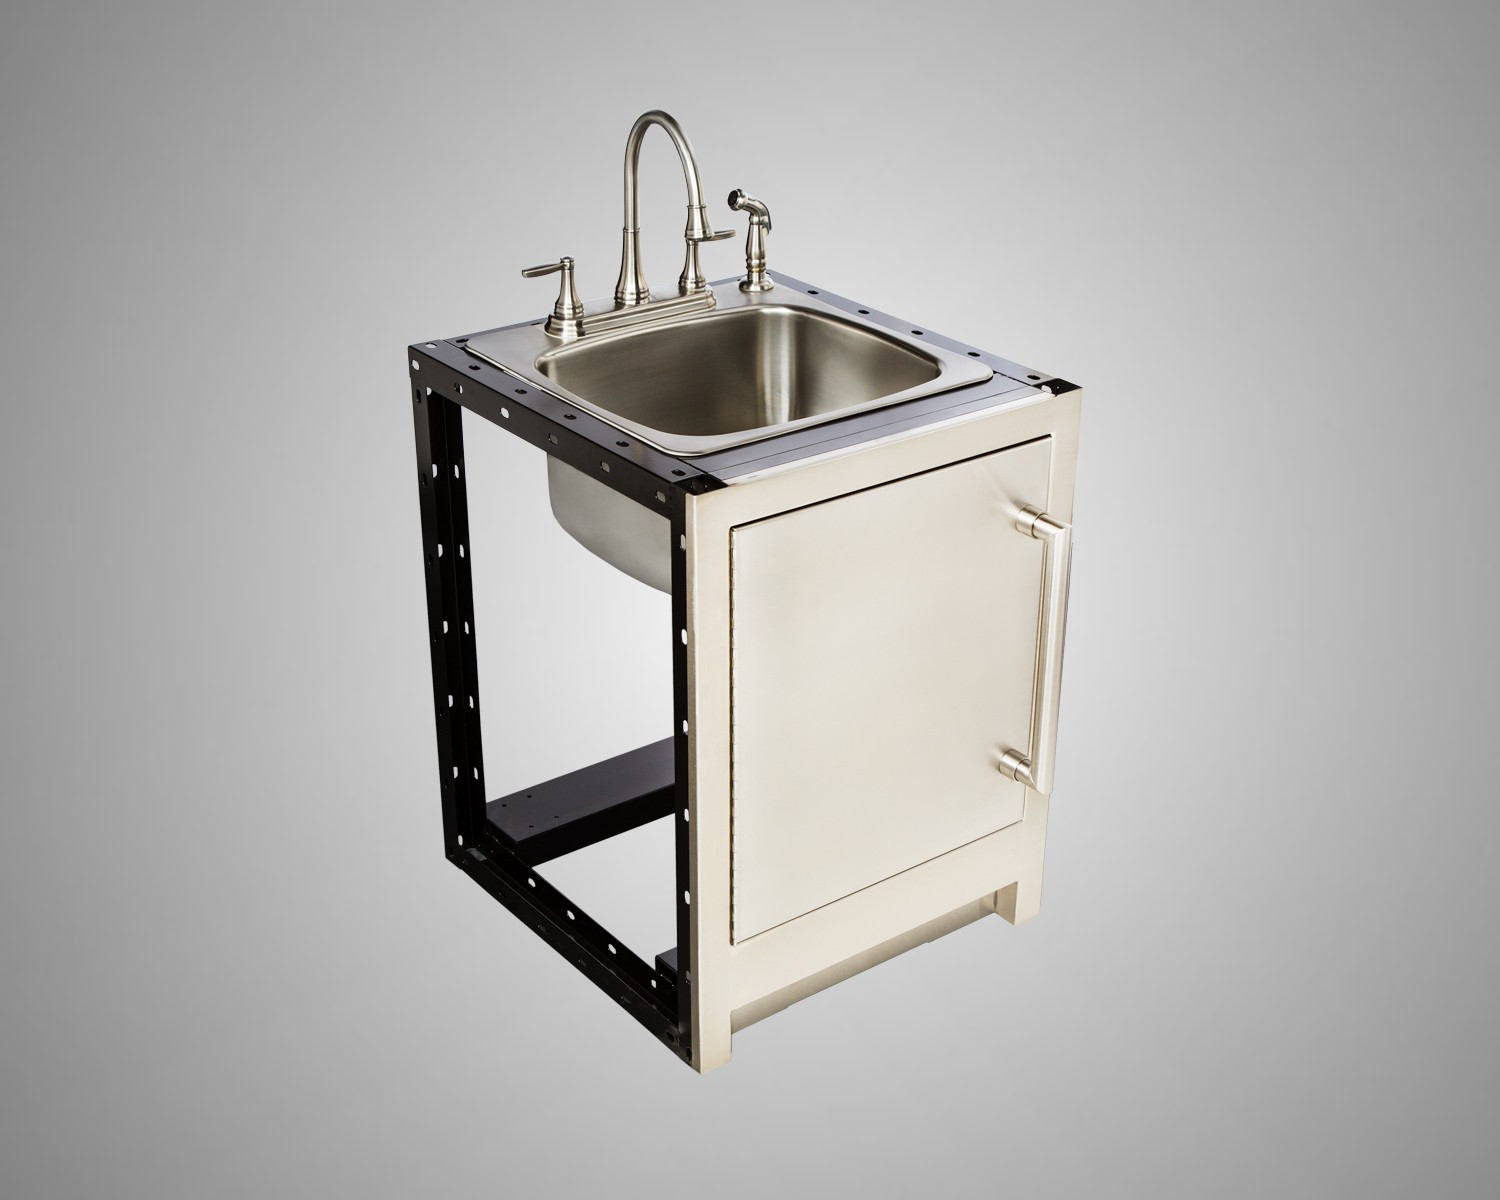 Outdoor Kitchen Sink And Cabinet
 Sink Cabinet Module Outdoor Kitchens Shop American